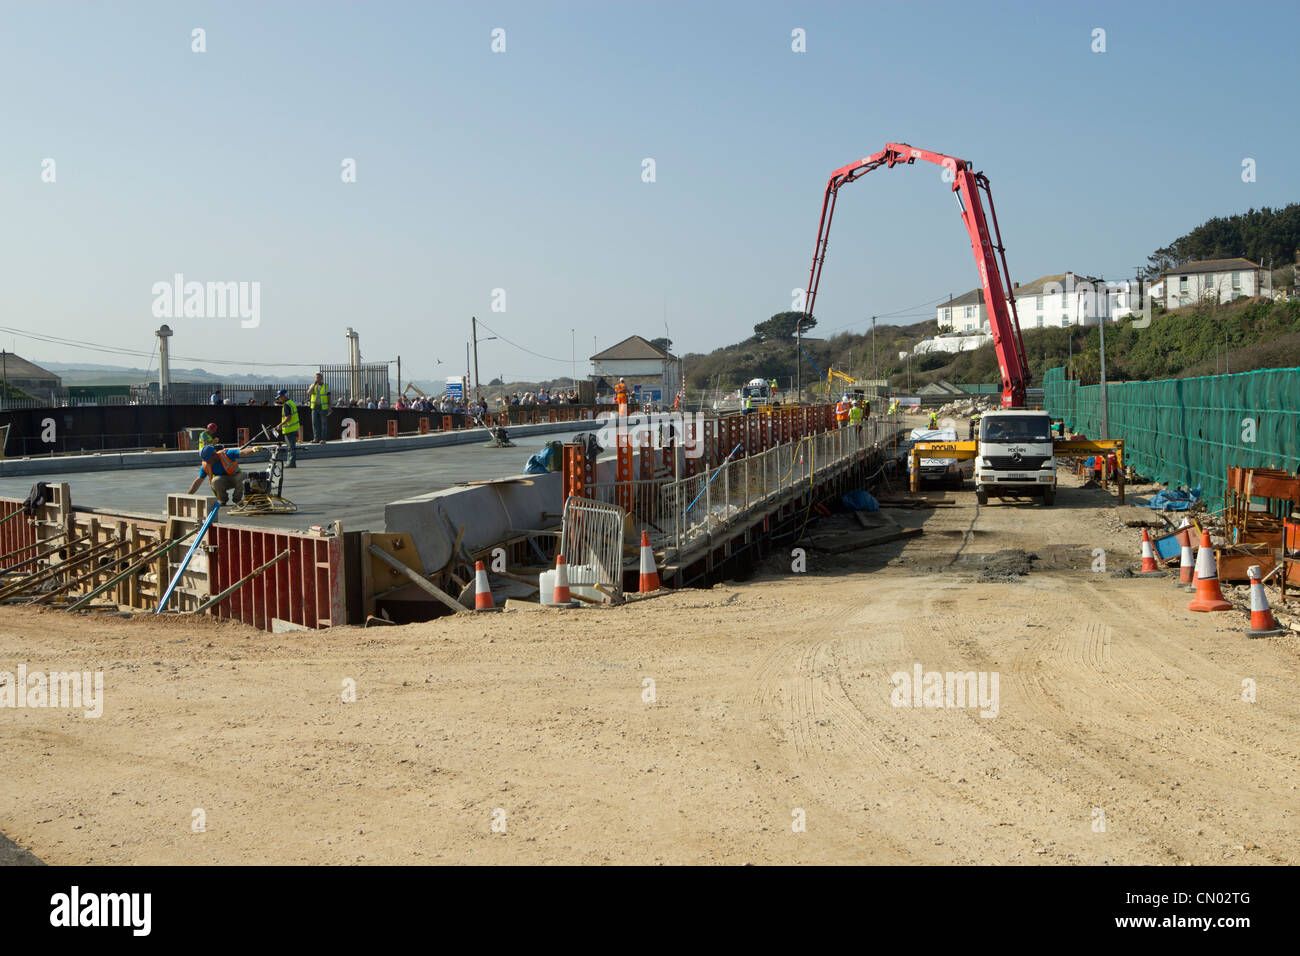 Smoothing the concrete during the concrete pour for the deck of the new bridge over Copperhouse Pool in Hayle, Cornwall UK. Stock Photo